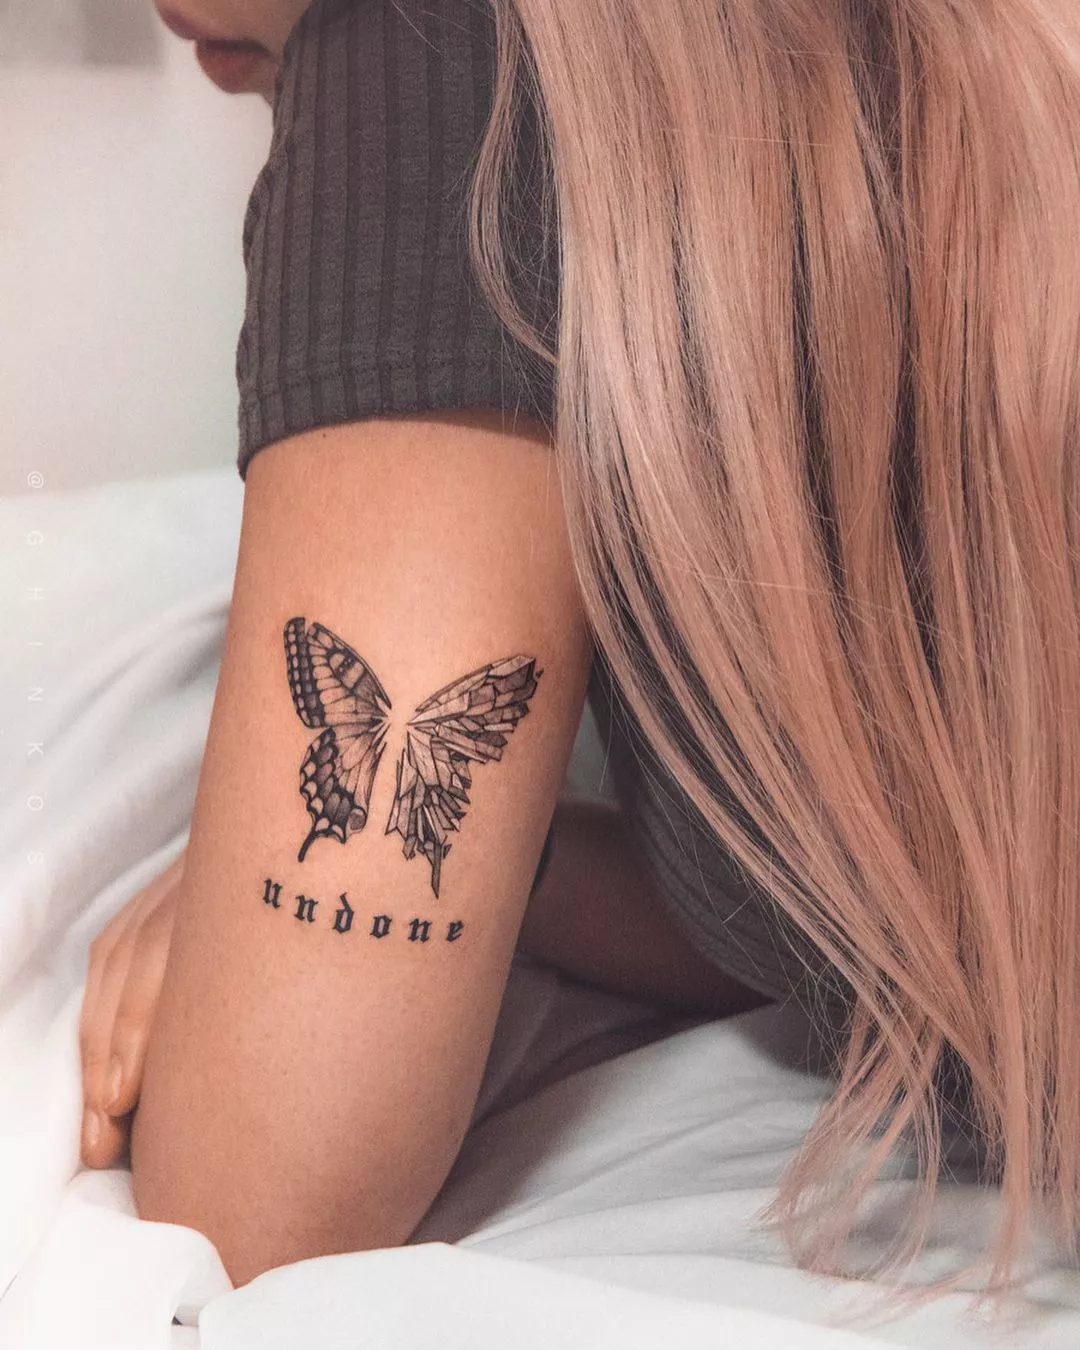 Butterfly tattoo on back of arm with different wings